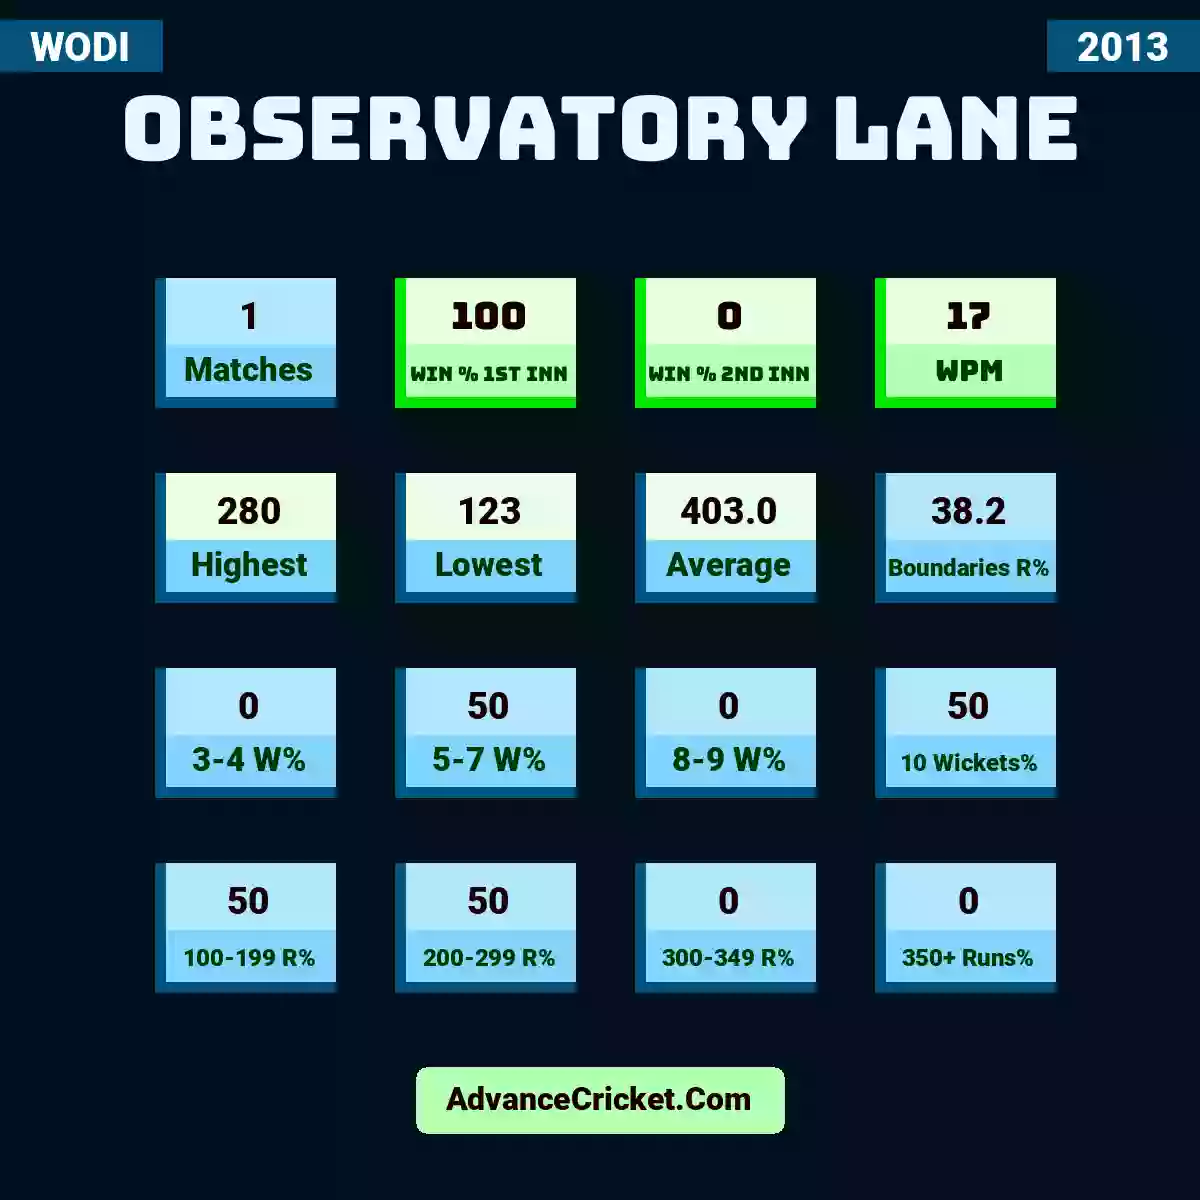 Image showing Observatory Lane with Matches: 1, Win % 1st Inn: 100, Win % 2nd Inn: 0, WPM: 17, Highest: 280, Lowest: 123, Average: 403.0, Boundaries R%: 38.2, 3-4 W%: 0, 5-7 W%: 50, 8-9 W%: 0, 10 Wickets%: 50, 100-199 R%: 50, 200-299 R%: 50, 300-349 R%: 0, 350+ Runs%: 0.